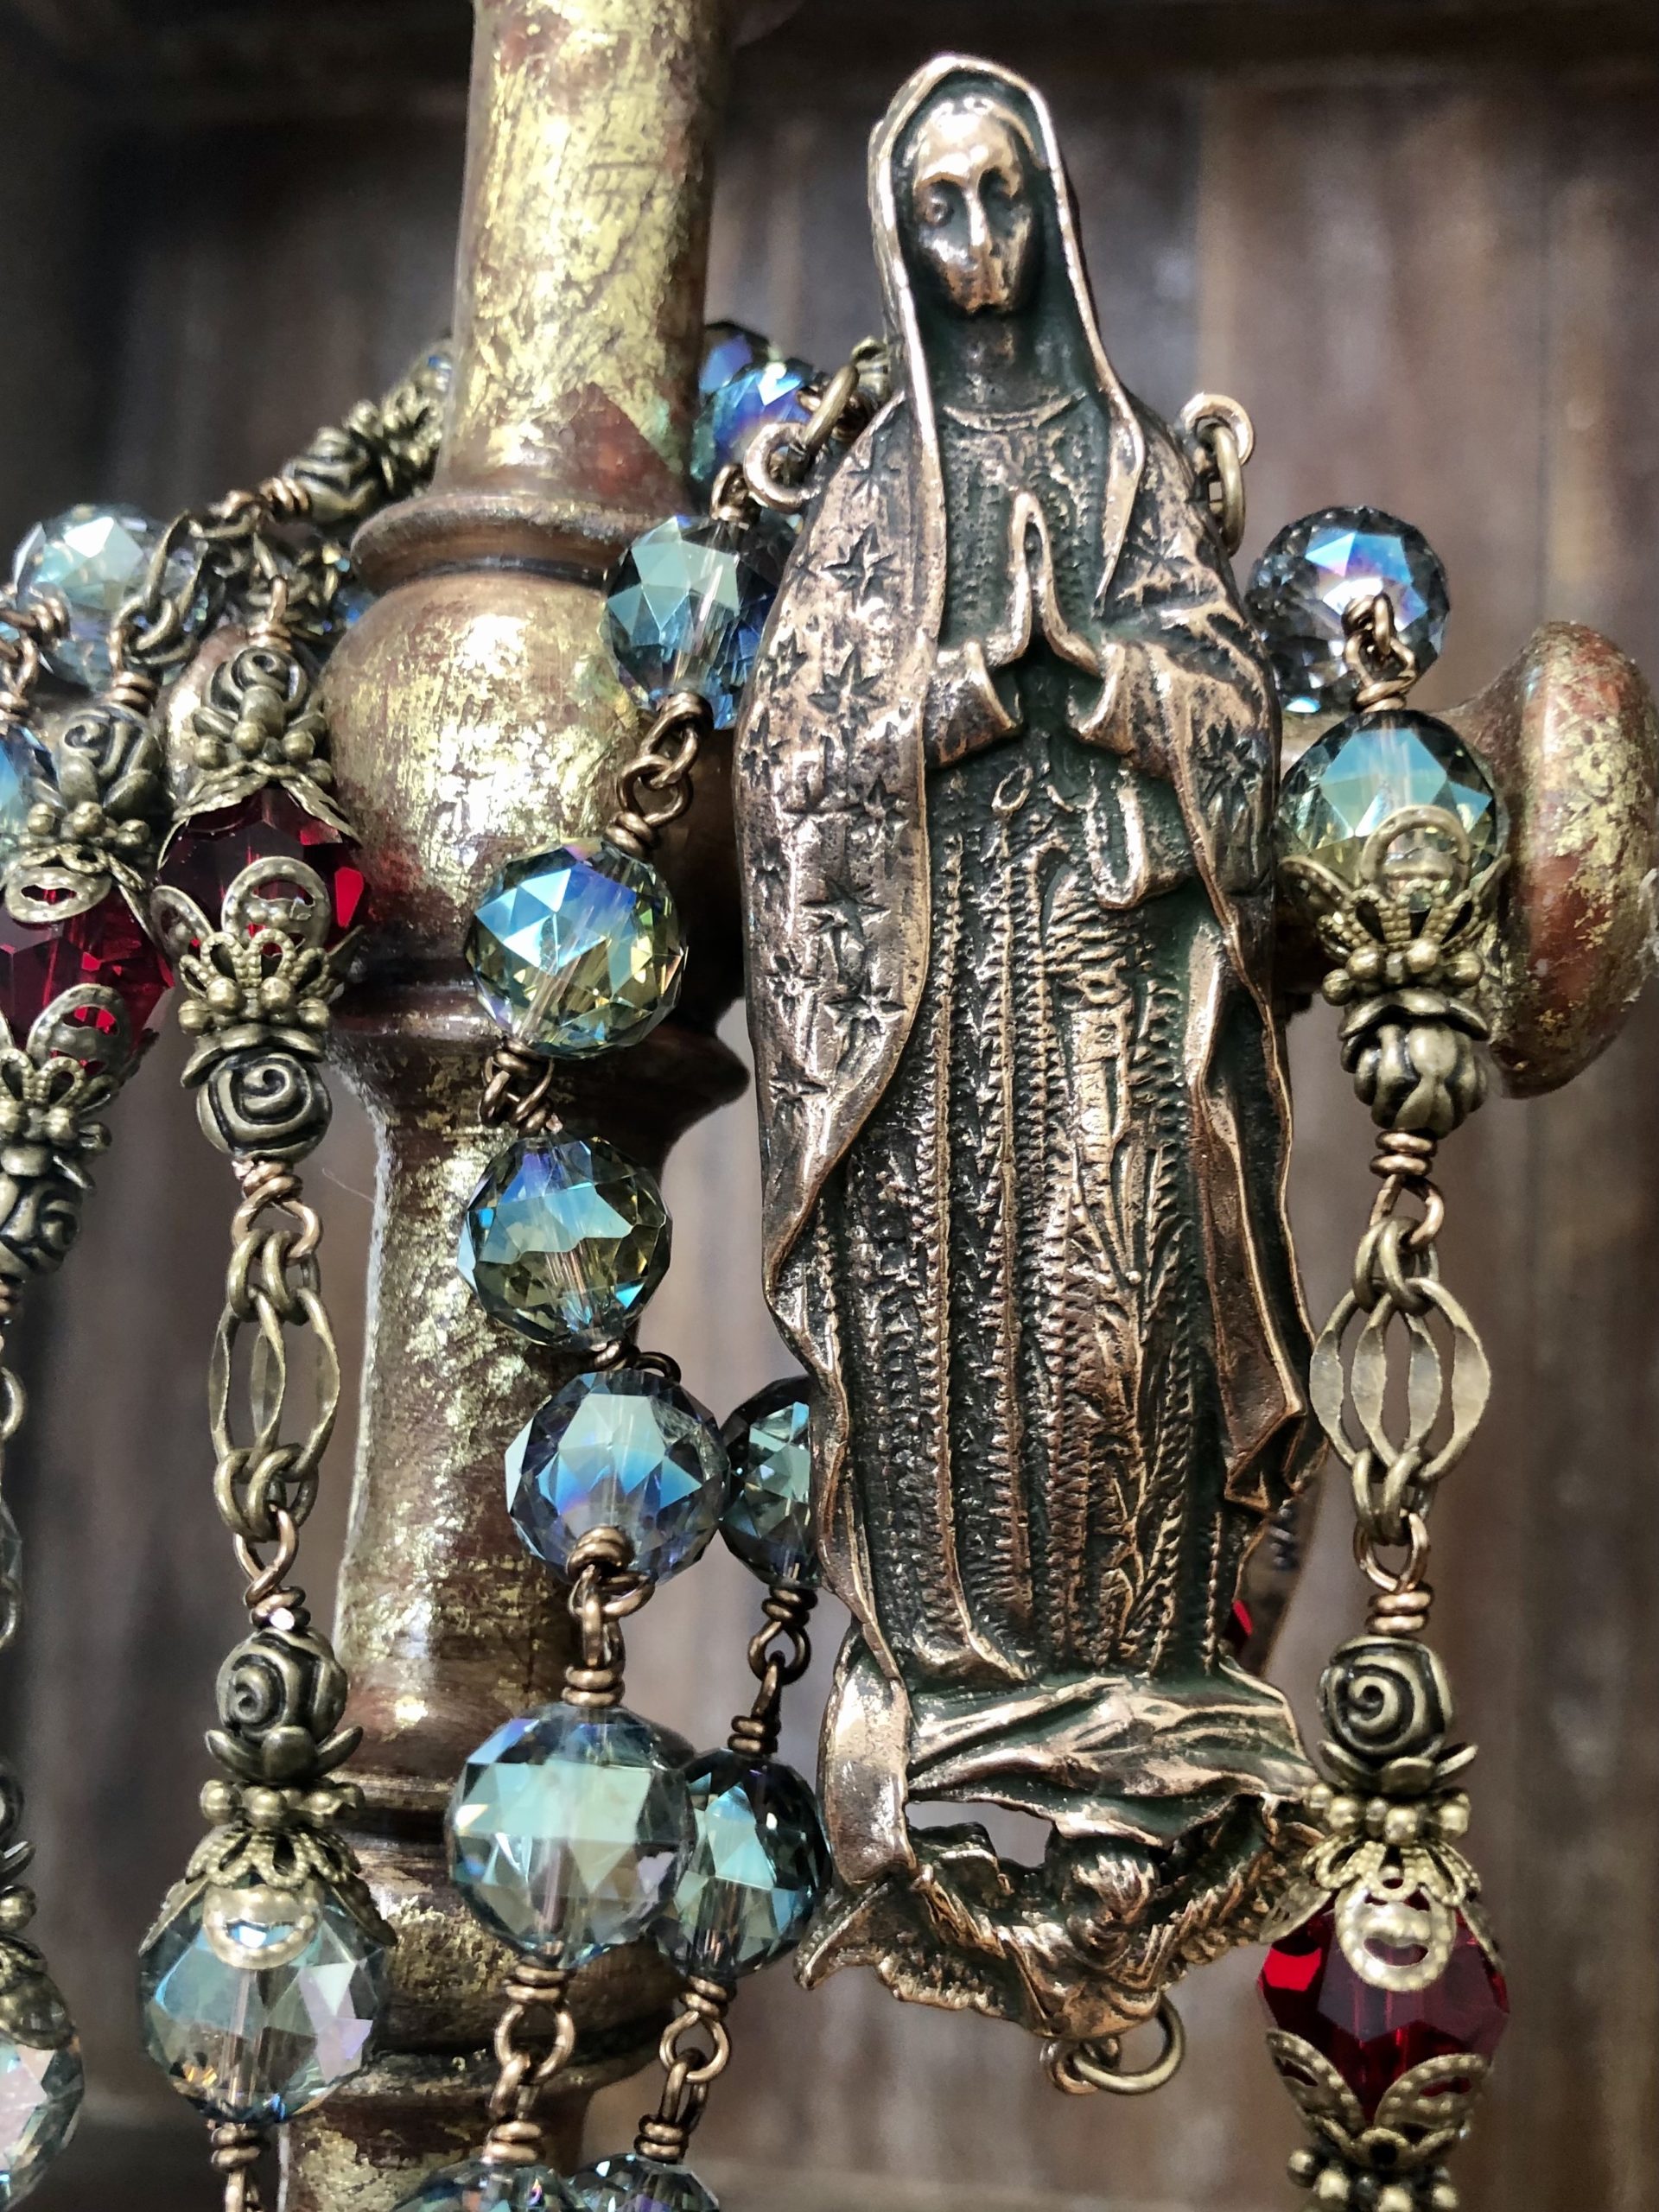 Our Lady of Guadalupe Malachite gemstone rosary beads with Four Basili –  Unique Rosary Beads